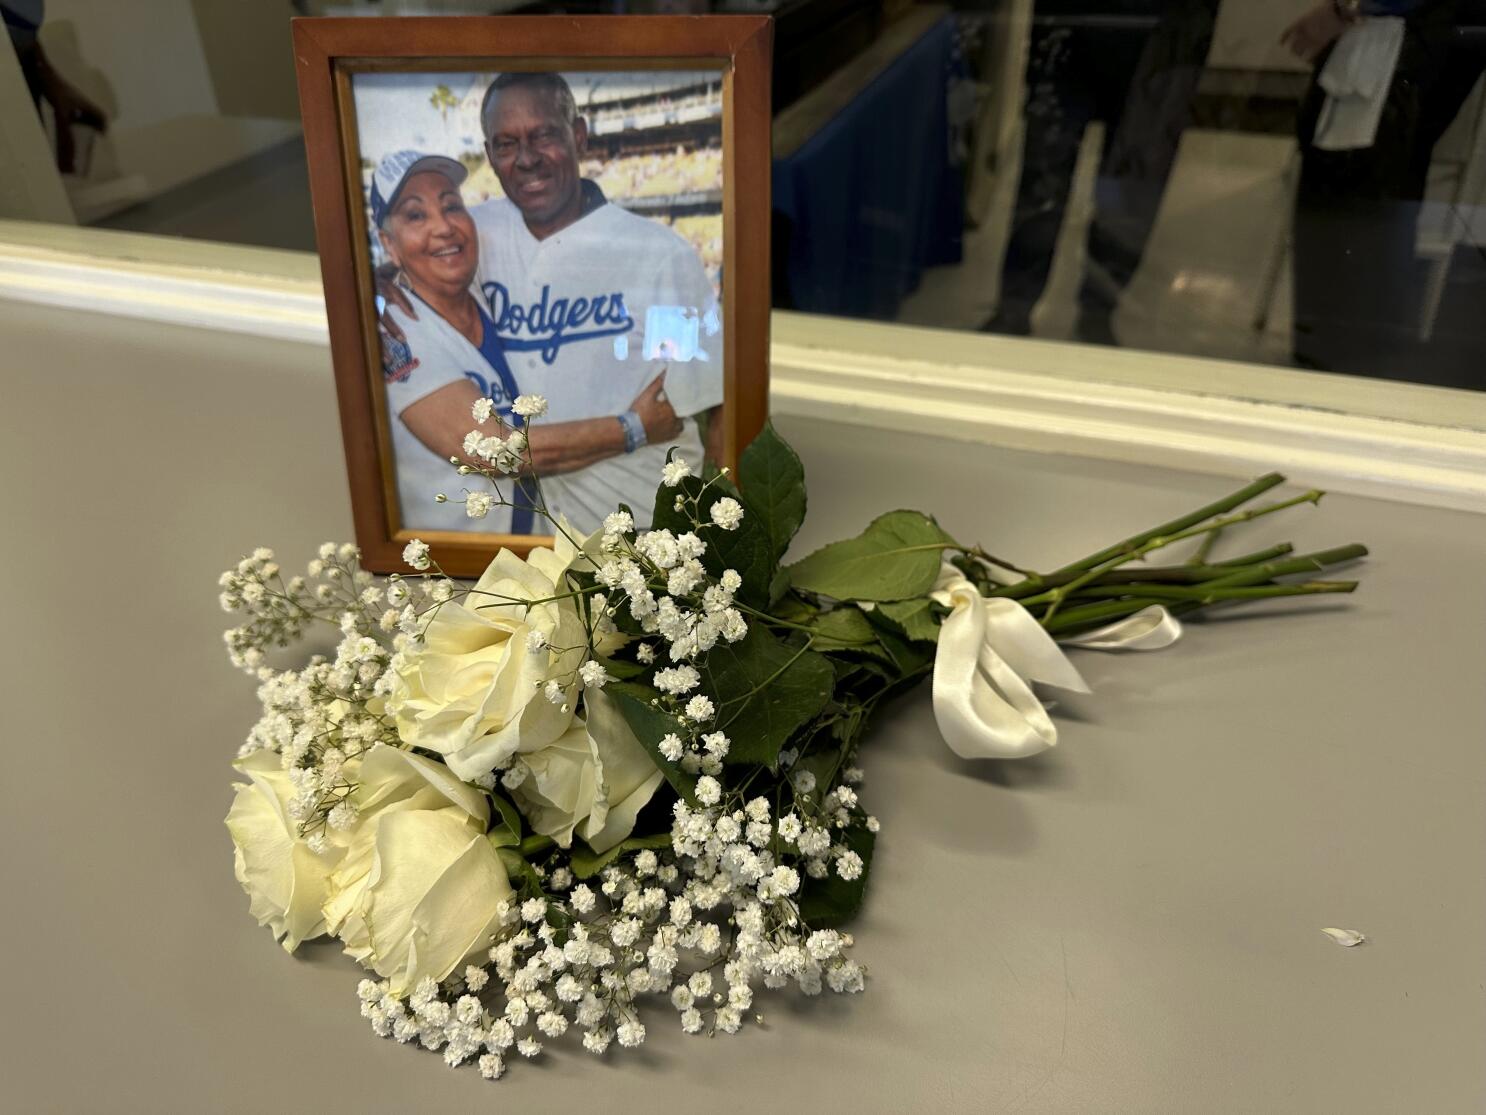 Margarita Mota, the wife of Dodgers great Manny Mota and matriarch of a  baseball family, dies at 81, Sports News